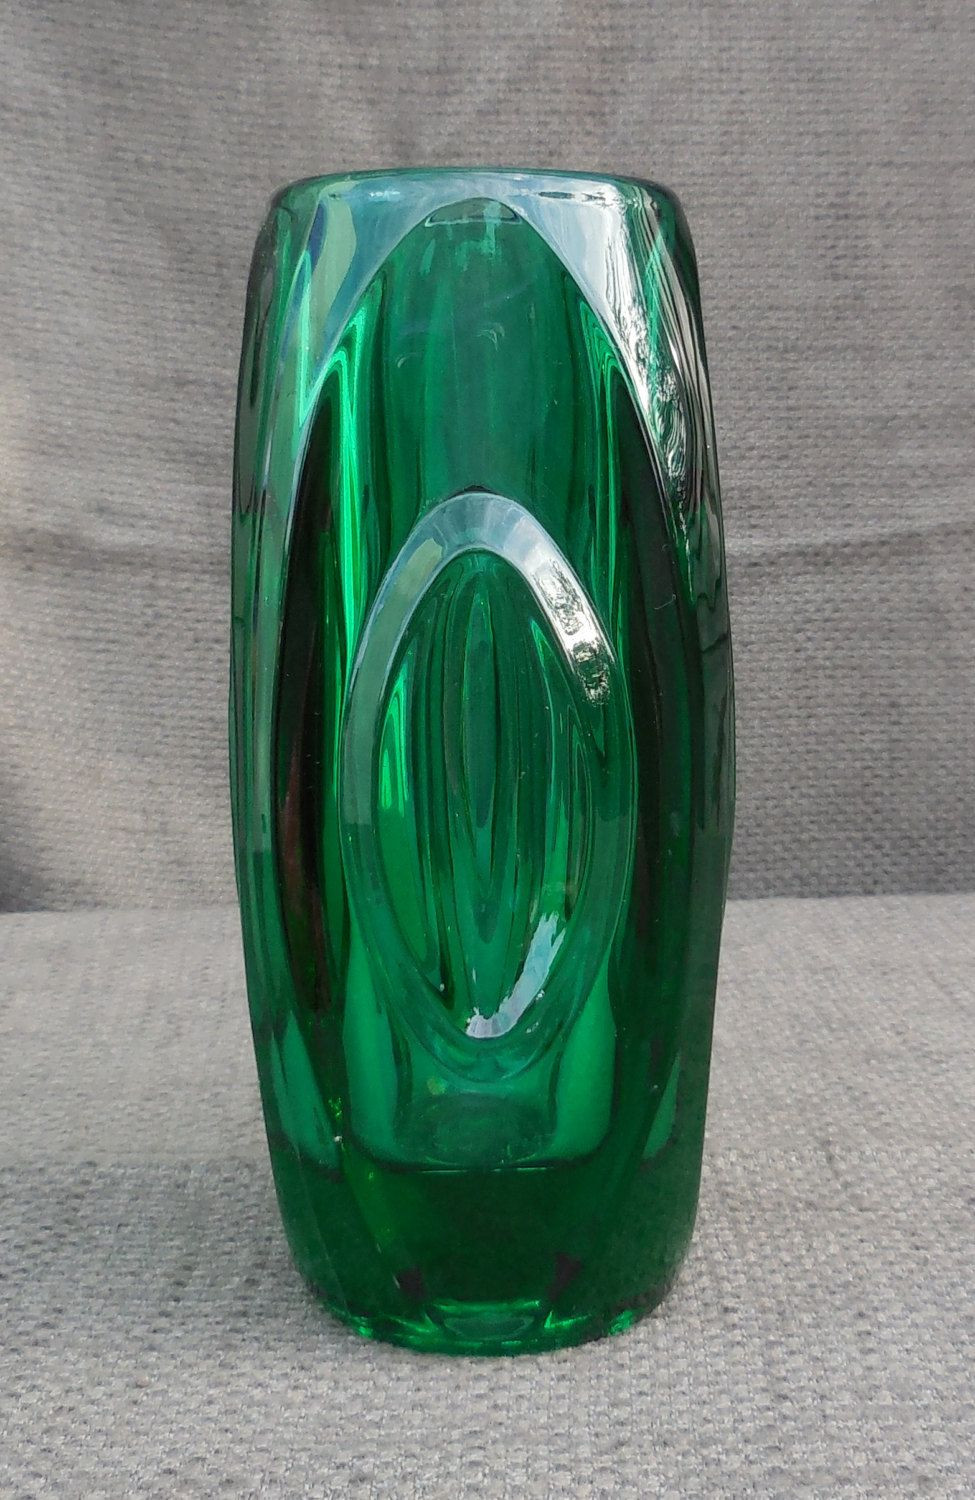 16 Fantastic ornate Vases for Sale 2024 free download ornate vases for sale of stunning 1950s vintage rosice czech lens green art glass vase by within stunning 1950s vintage rosice czech lens green art glass vase by rudolph schrotter